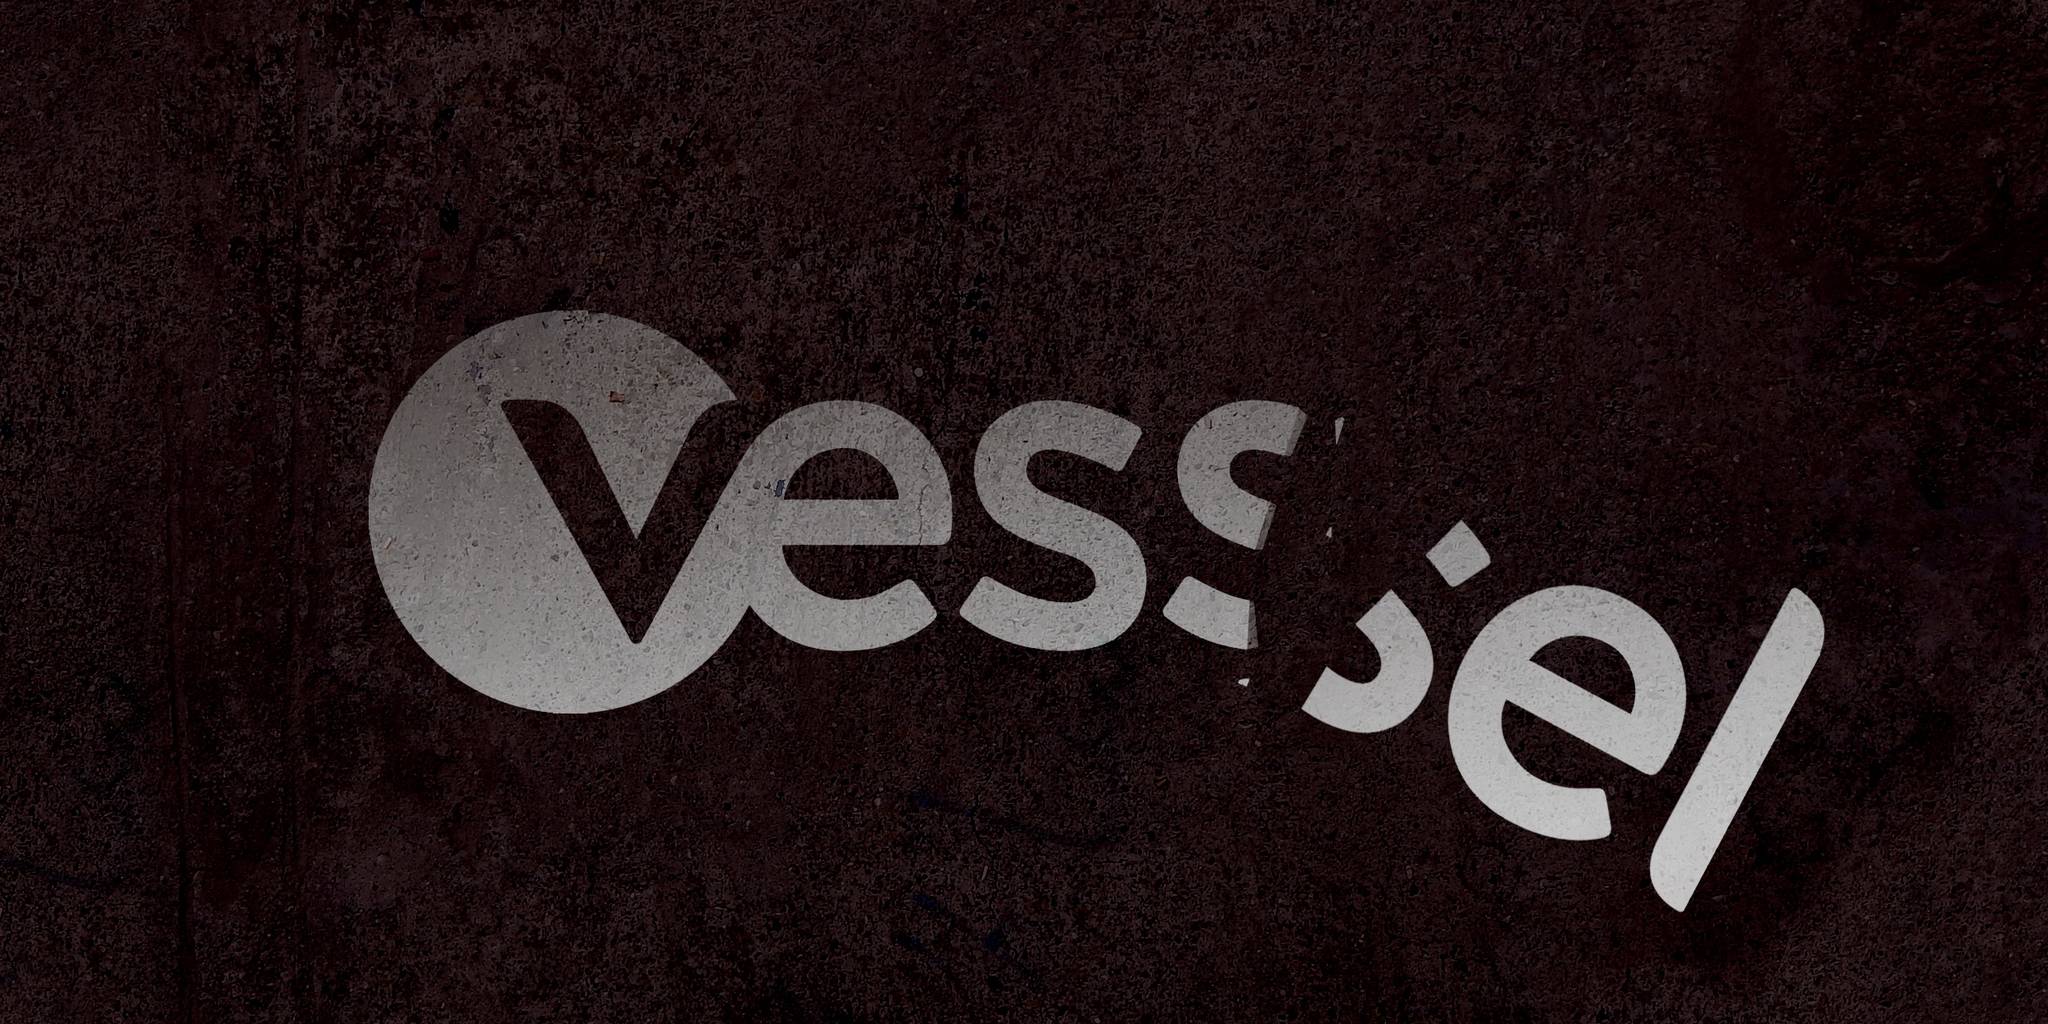 Vessel Logo - Can Vessel change course before the subscription service goes under